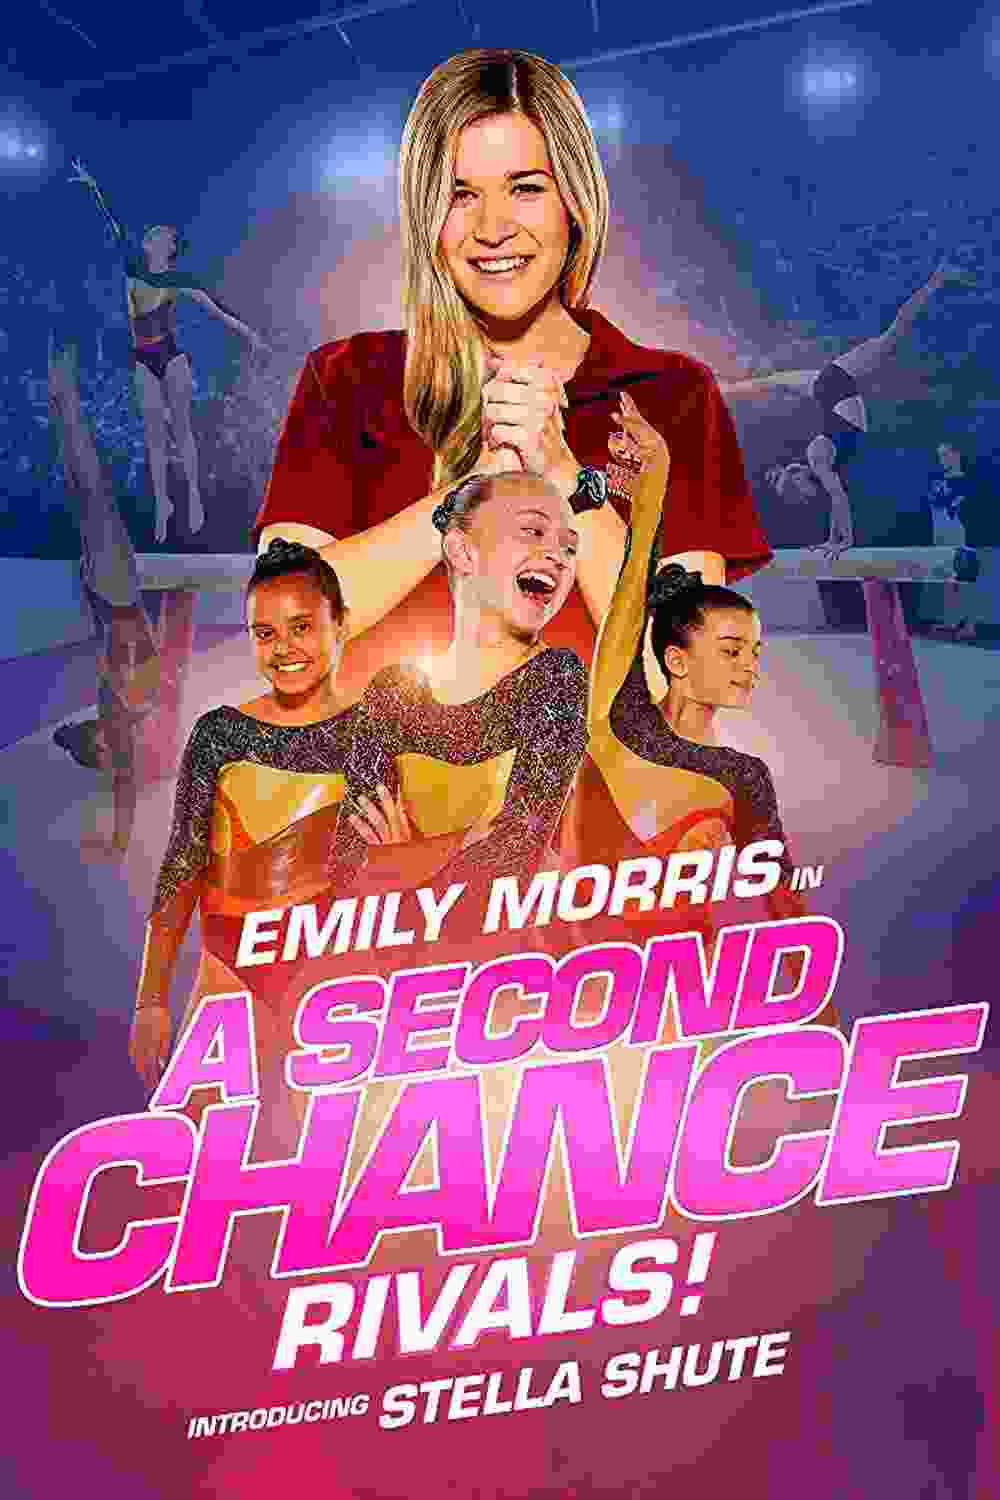 A Second Chance: Rivals! (2019) Emily Morris